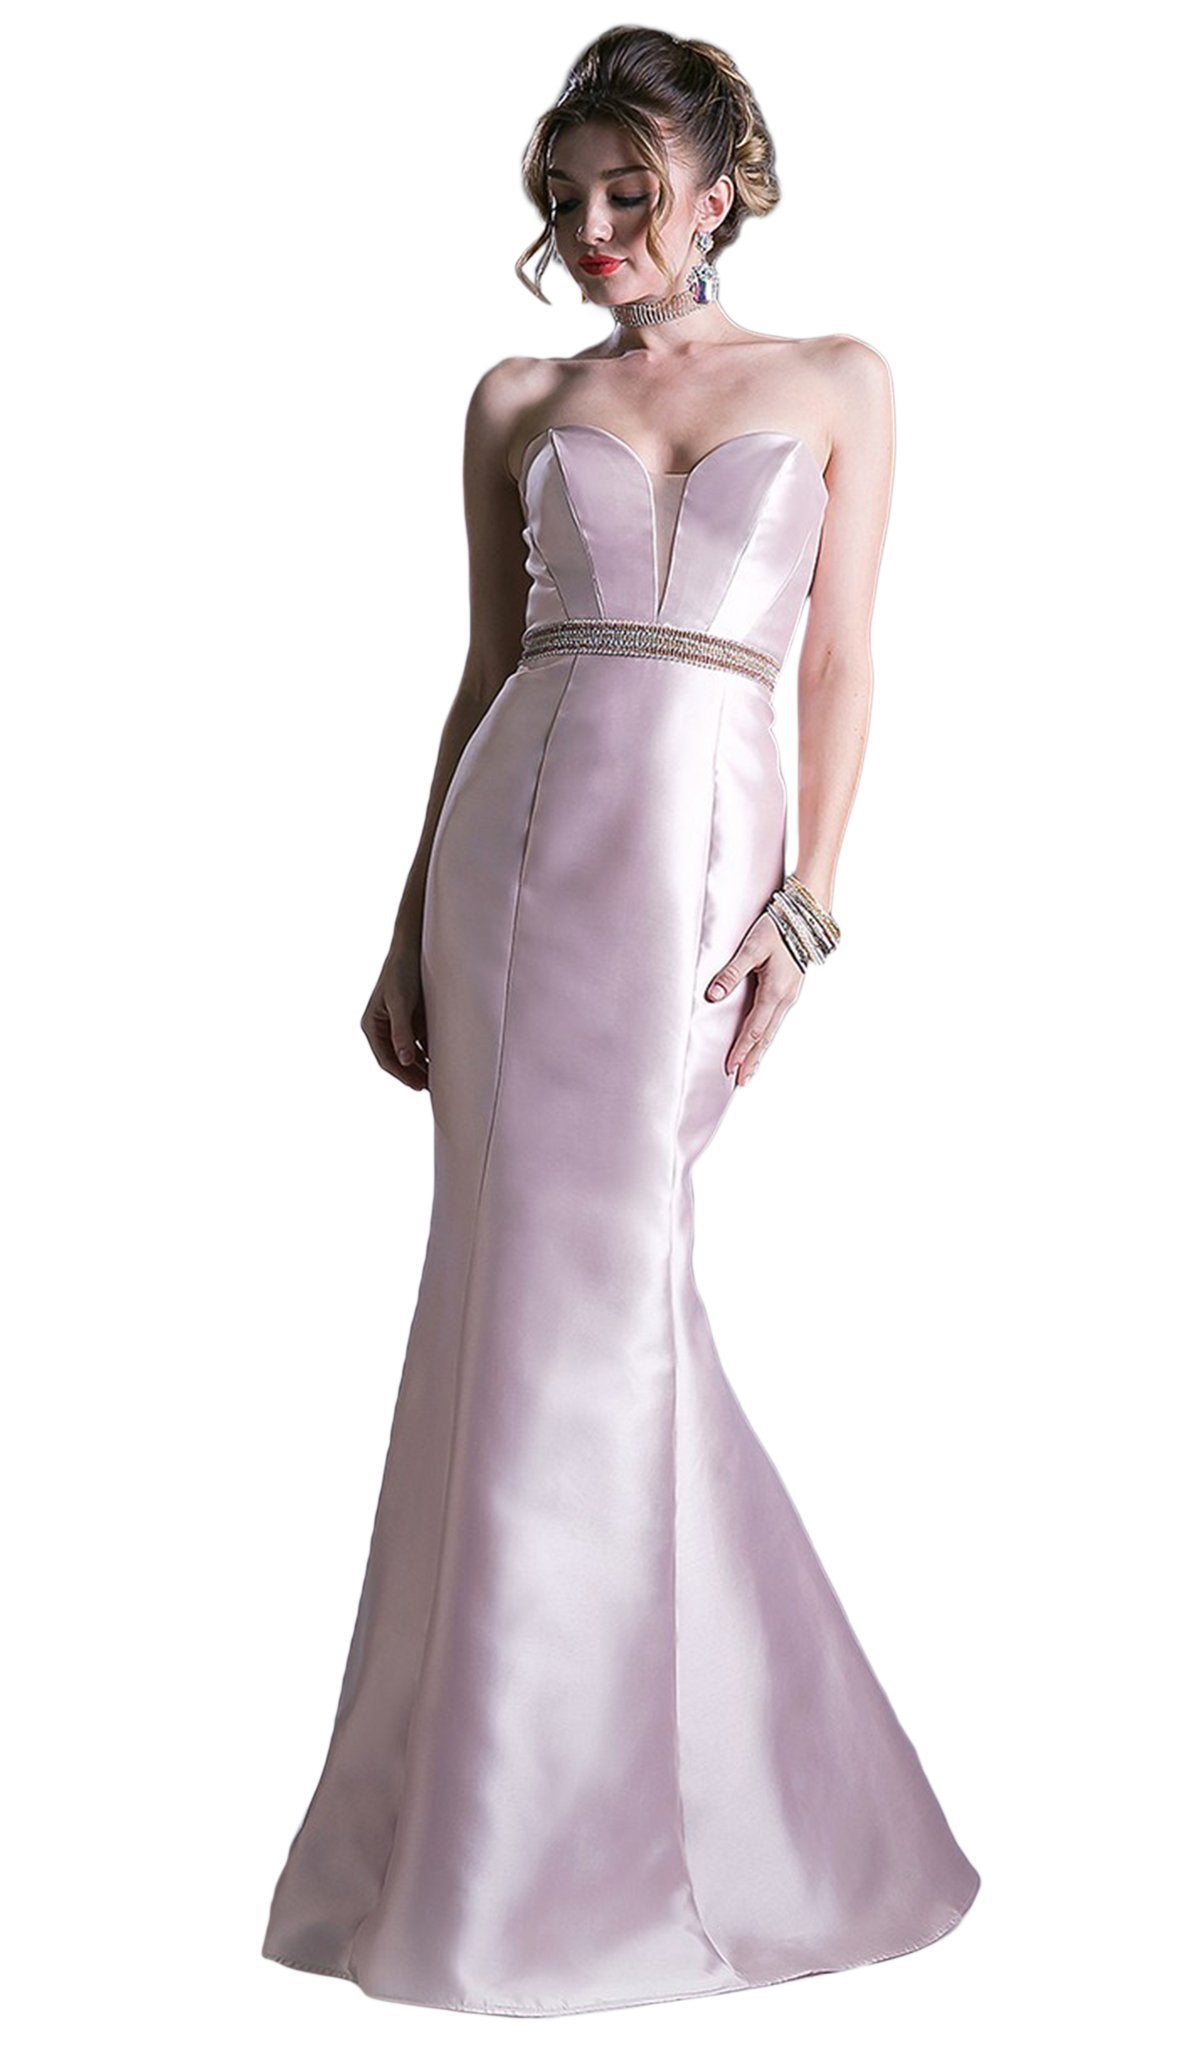 Cinderella Divine - Strapless Plunging Sweetheart Jeweled Mermaid Gown
